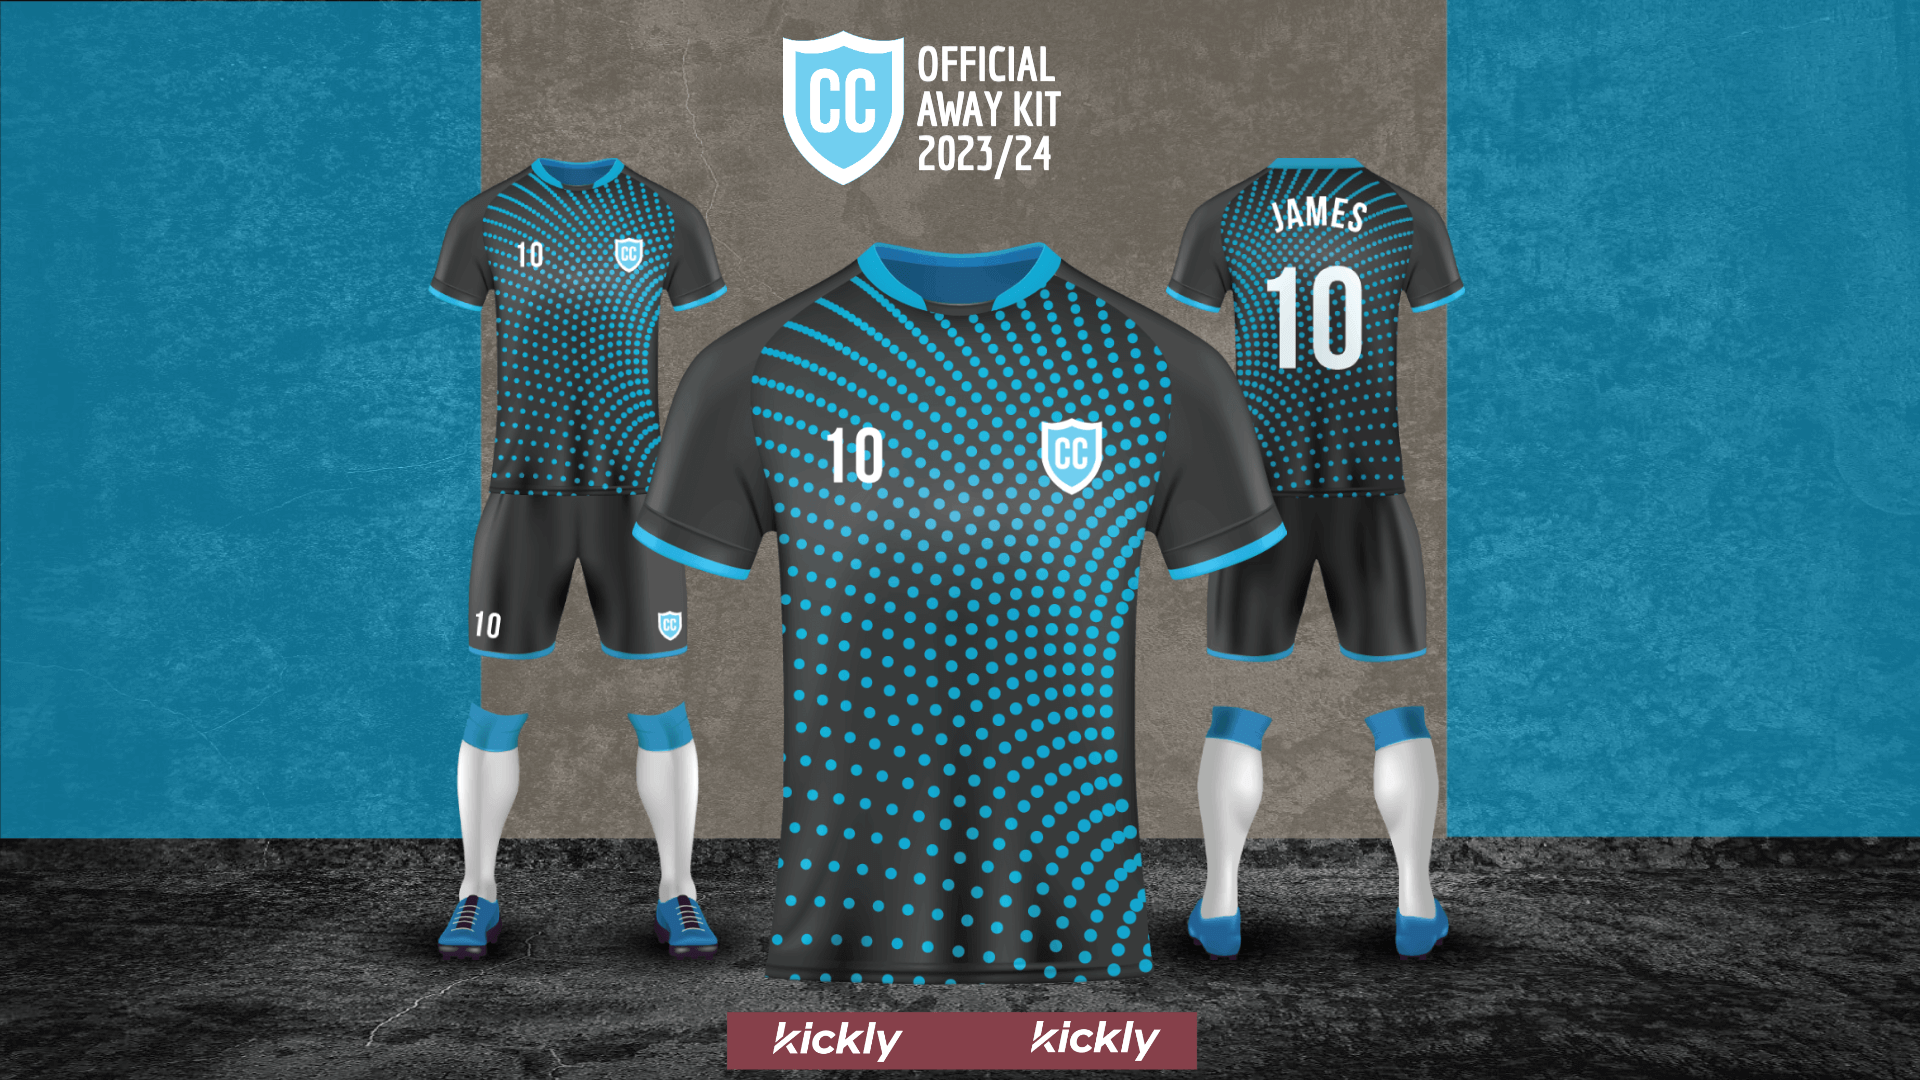 New Official Away Kit Template Design